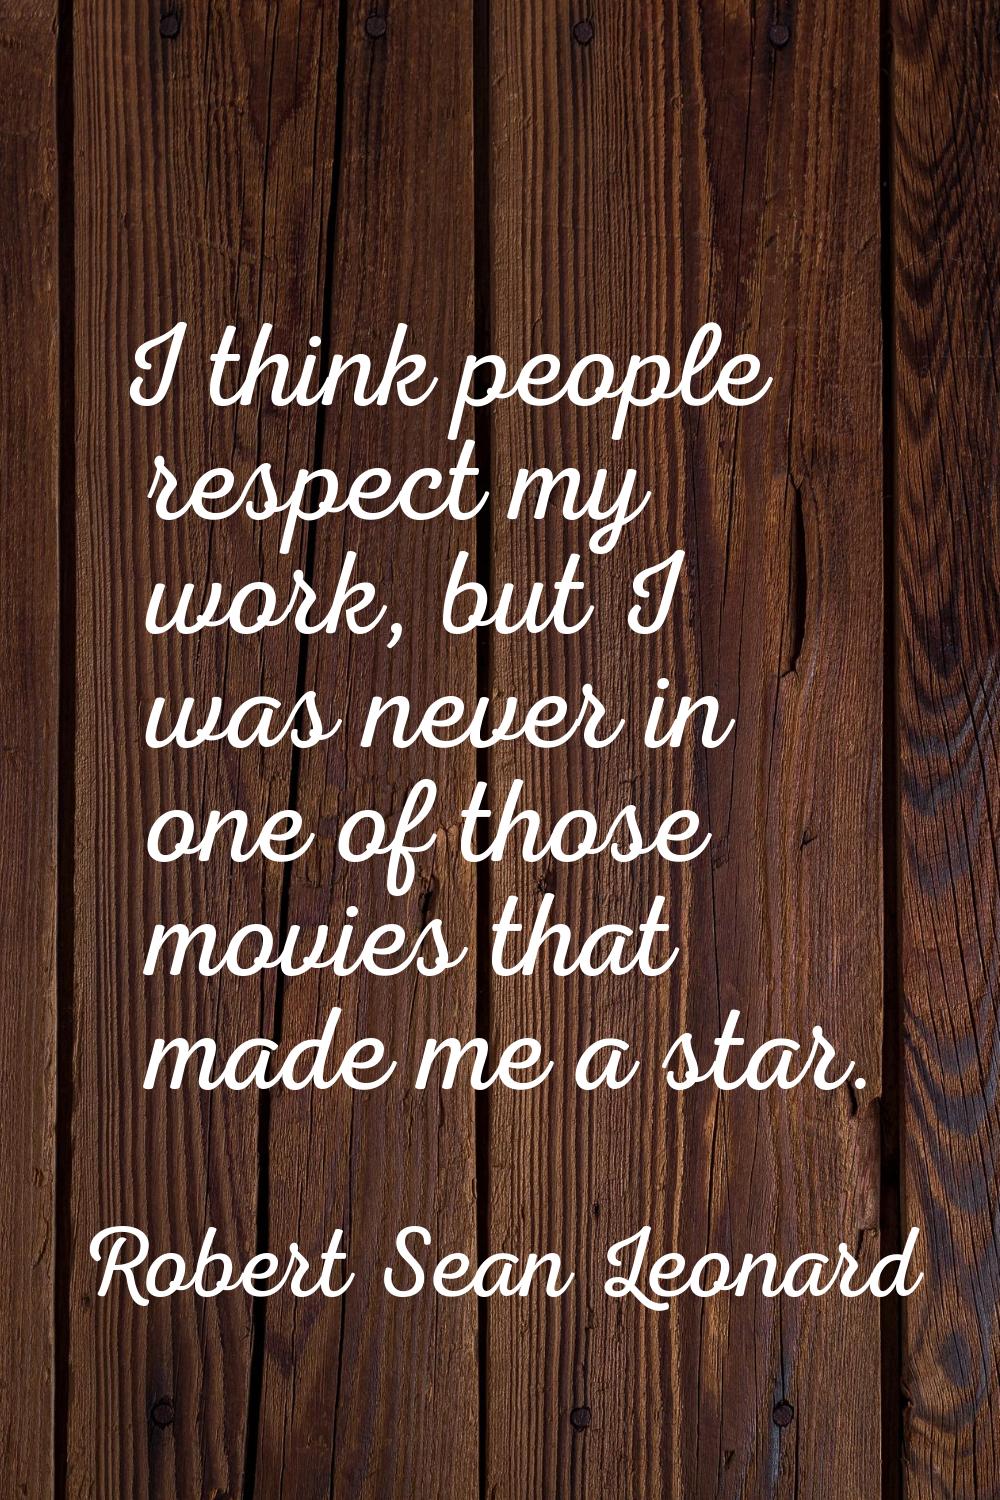 I think people respect my work, but I was never in one of those movies that made me a star.